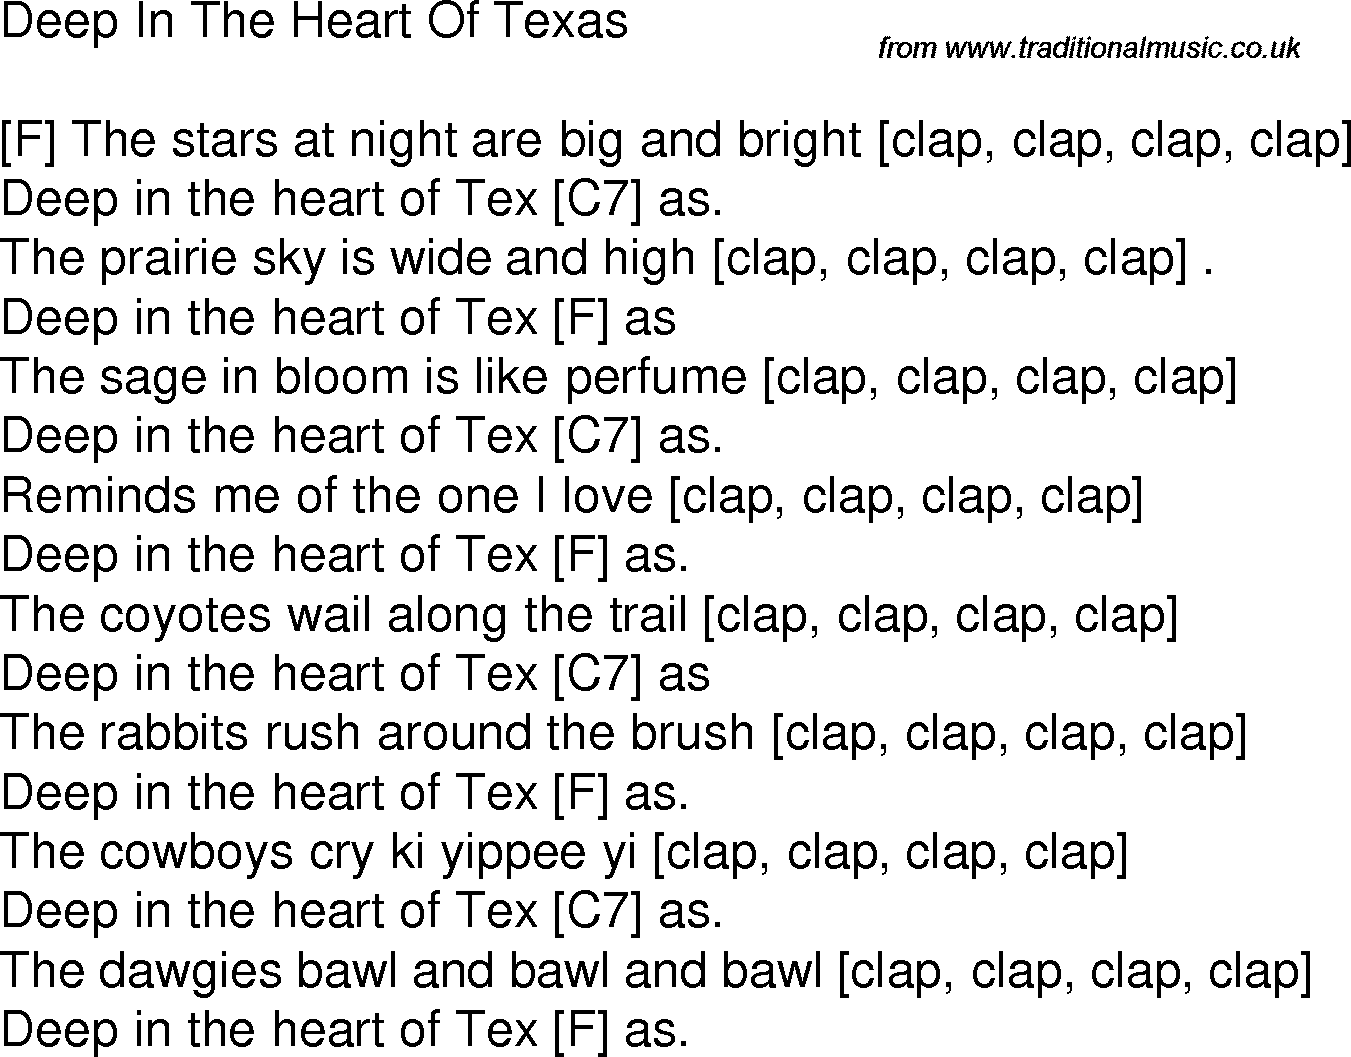 old-time-song-lyrics-with-guitar-chords-for-deep-in-the-heart-of-texas-f